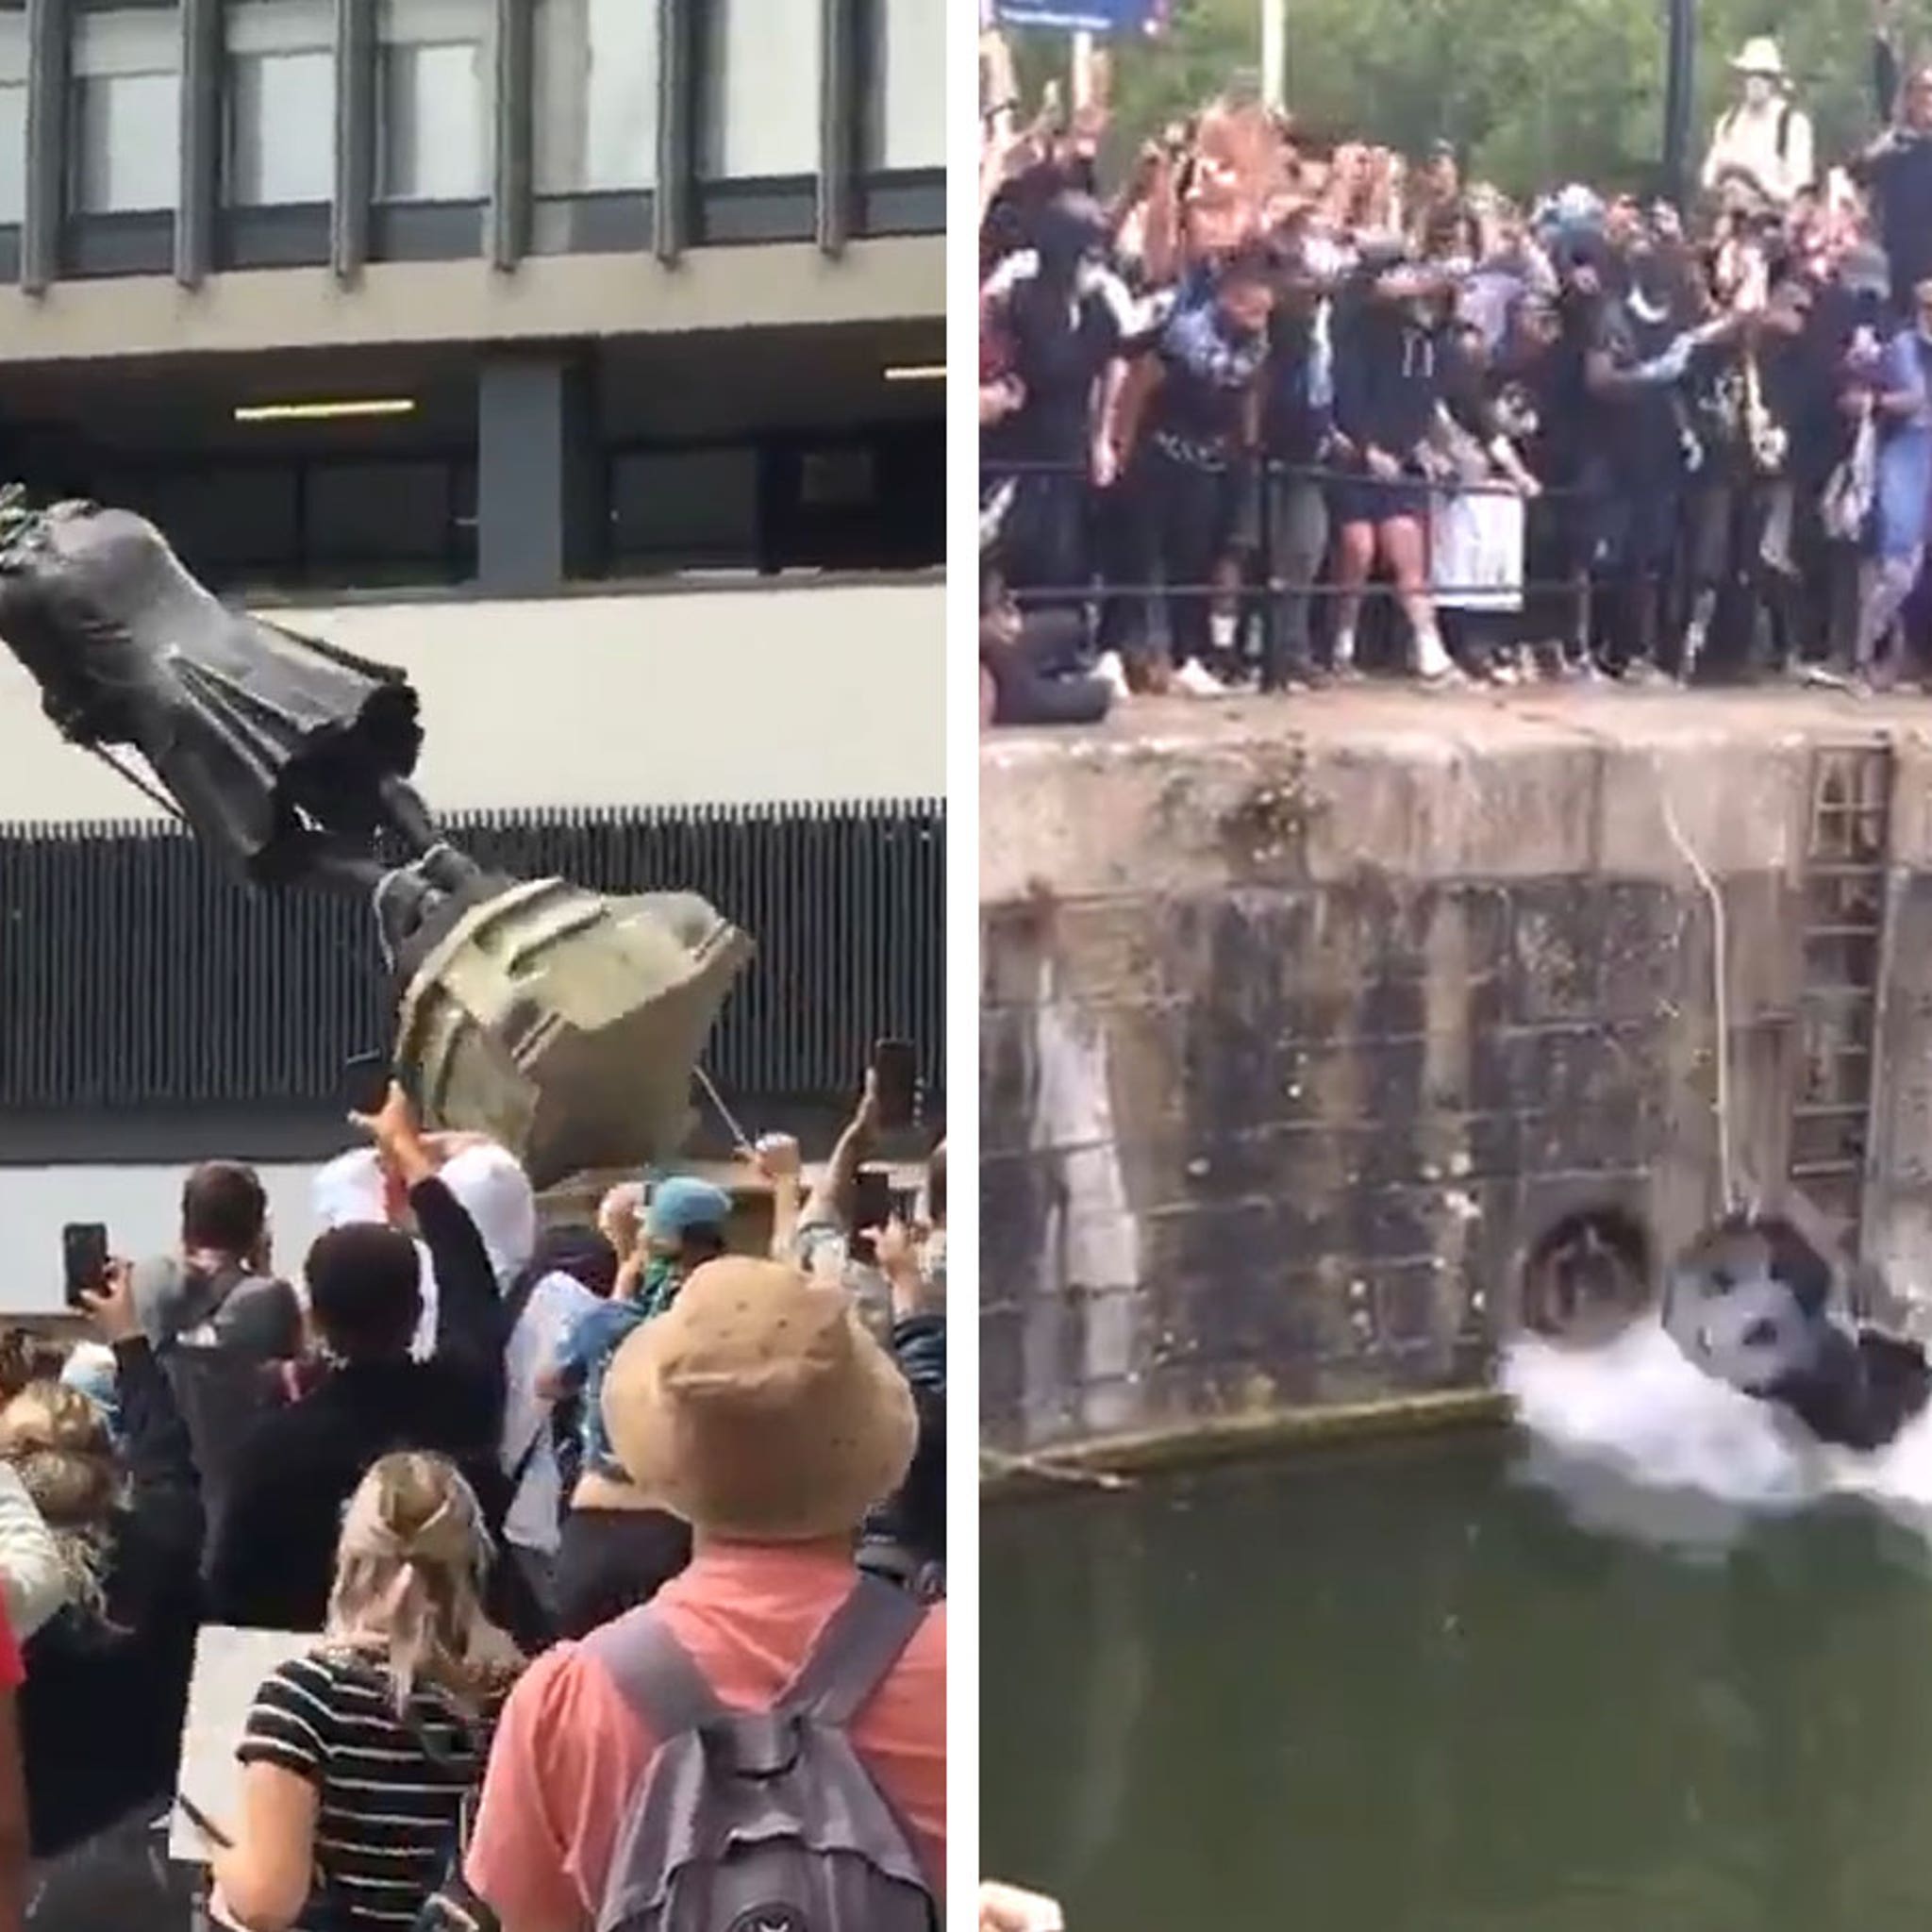 BLM Protesters in UK Tear Down Statue of Slave Trader Edward Colston